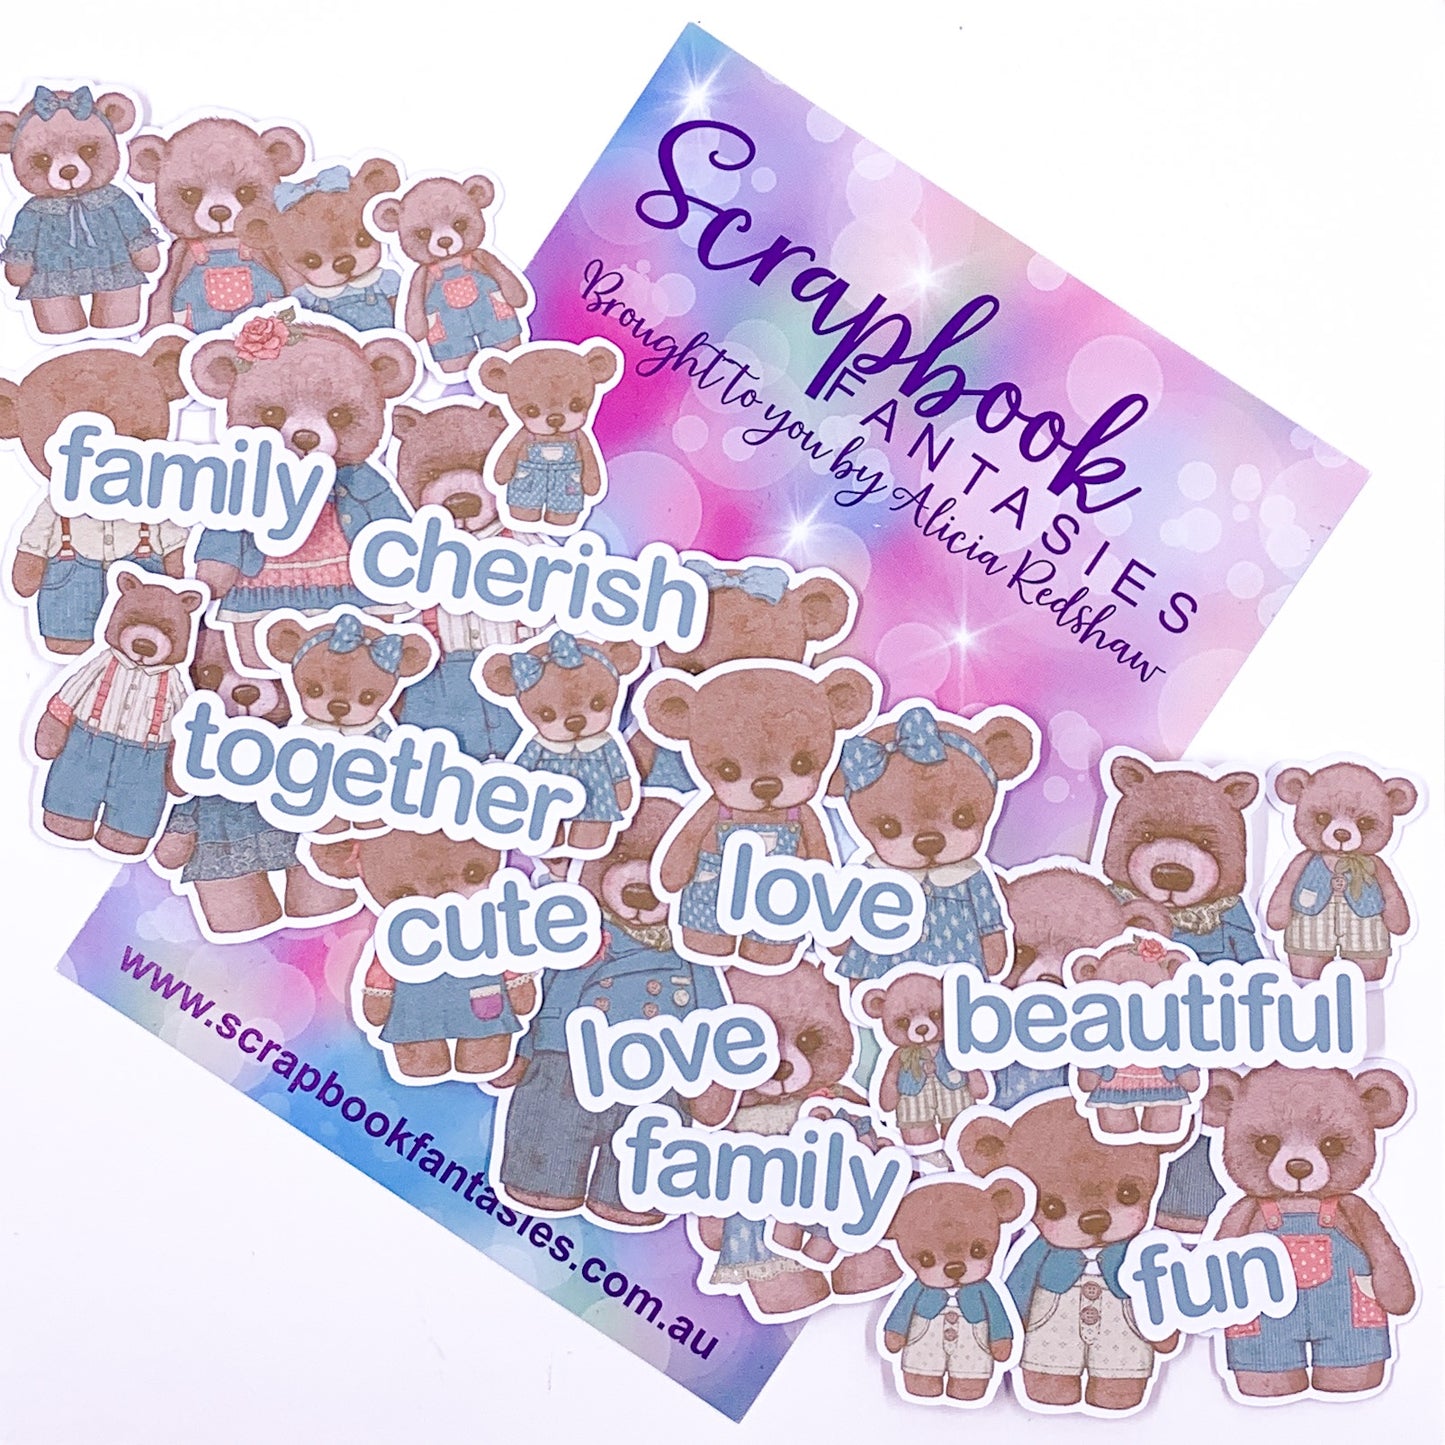 Beautiful Family - Bears & Words 7 Colour-Cuts (35 pieces) Teal & Brown - Designed by Alicia Redshaw